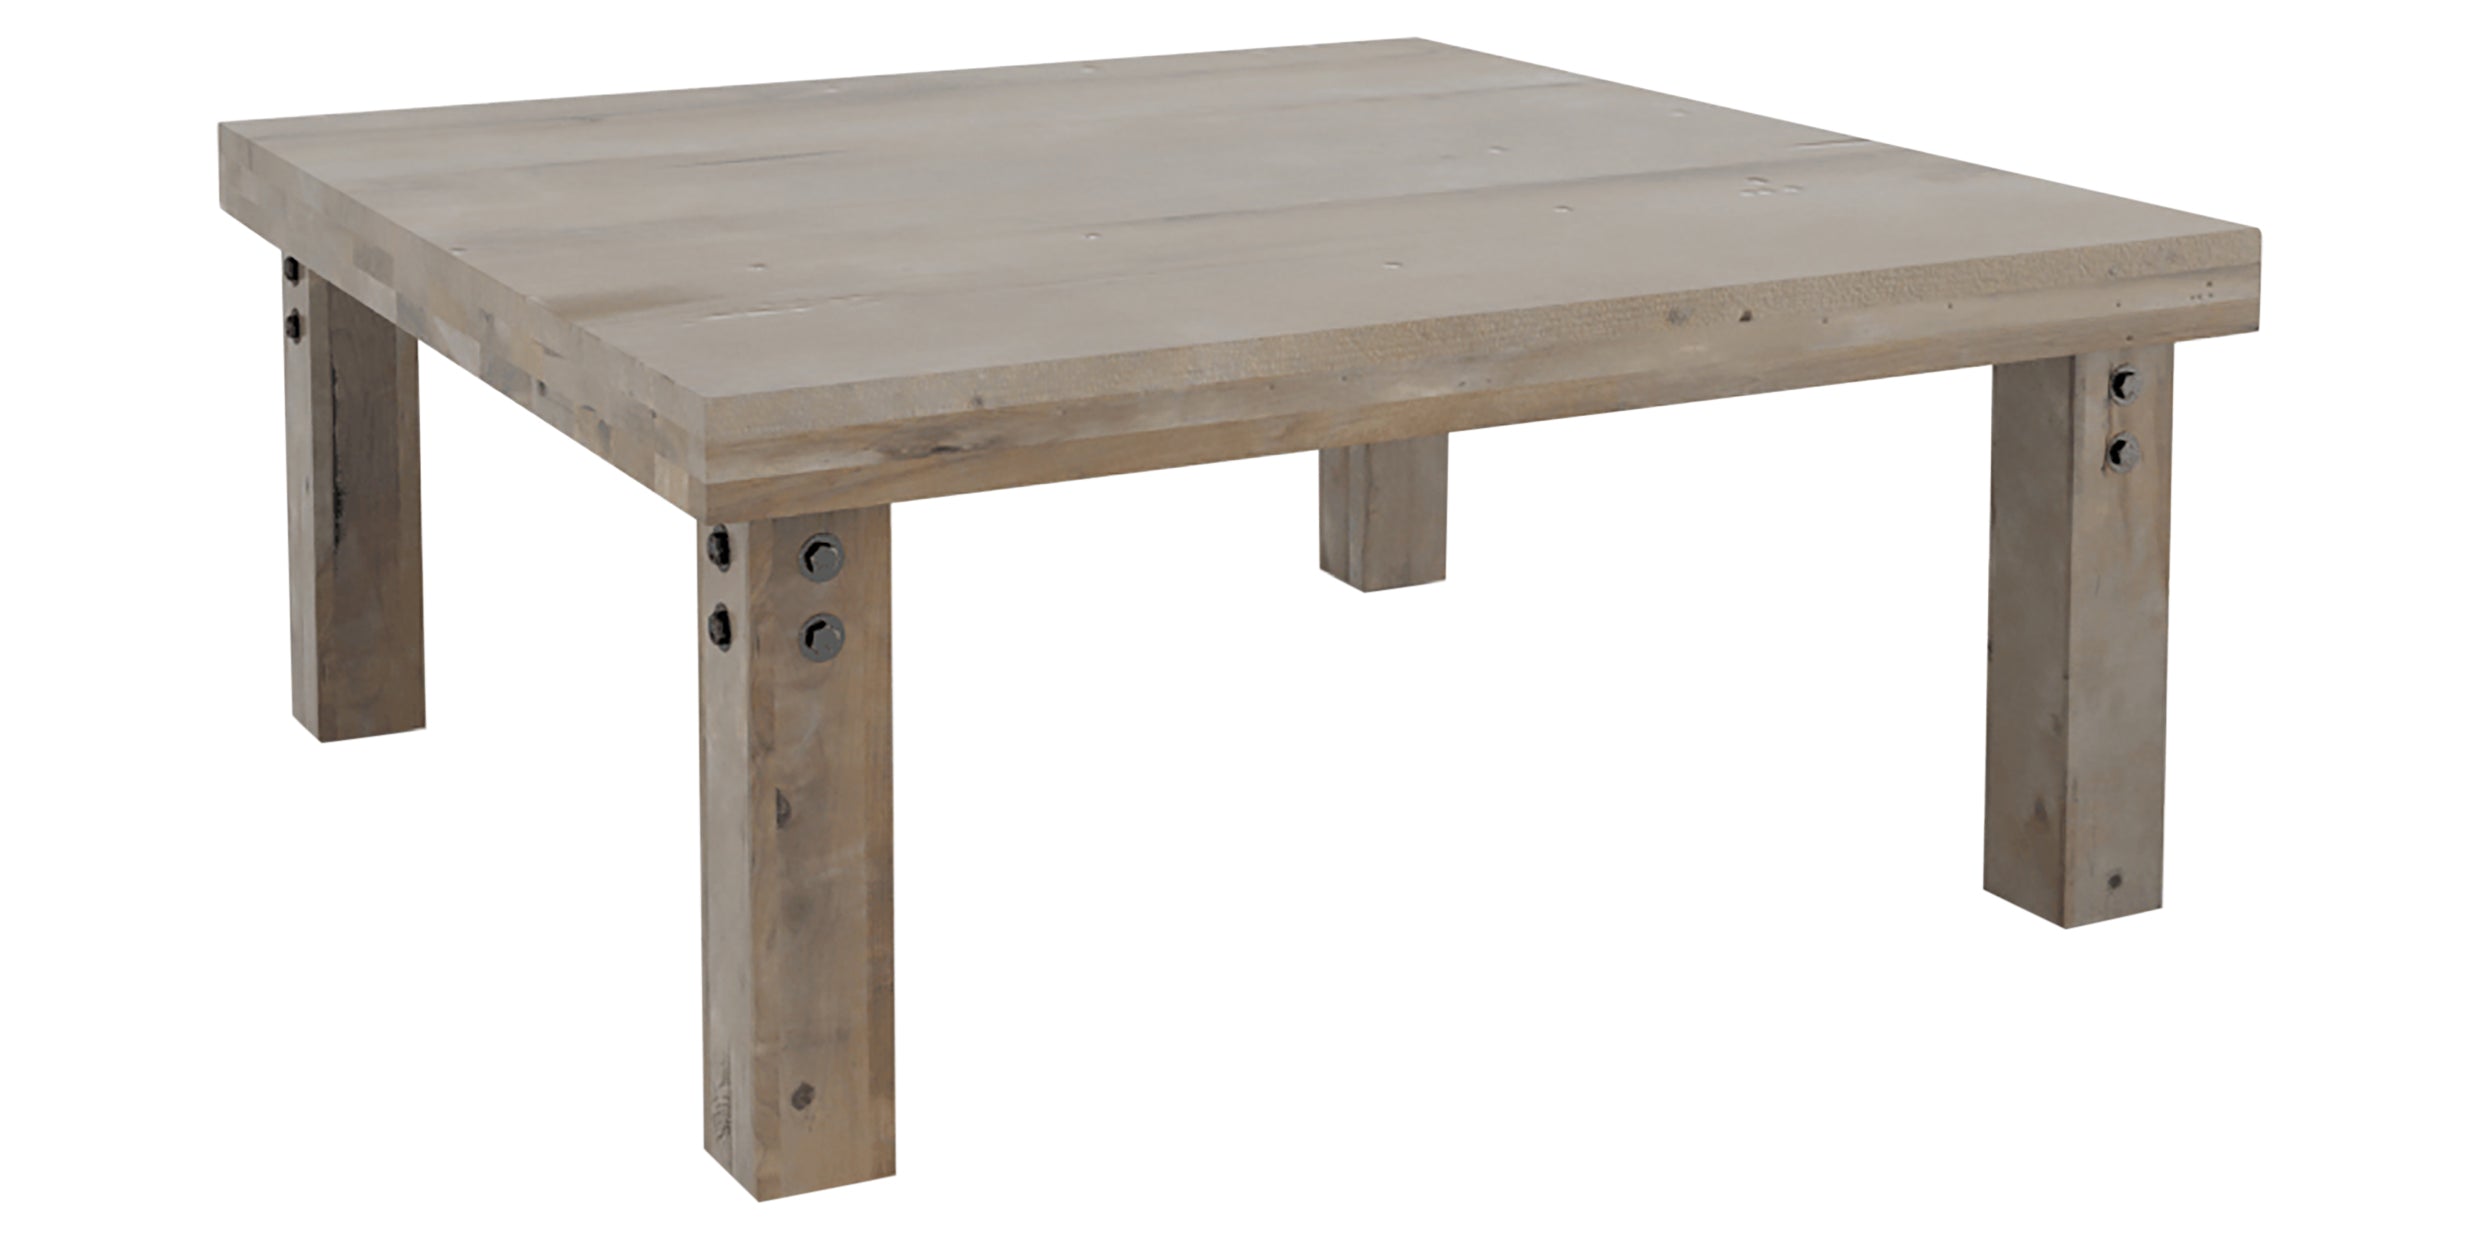 Shadow with HD Legs | Canadel Loft Coffee Table 4242 | Valley Ridge Furniture